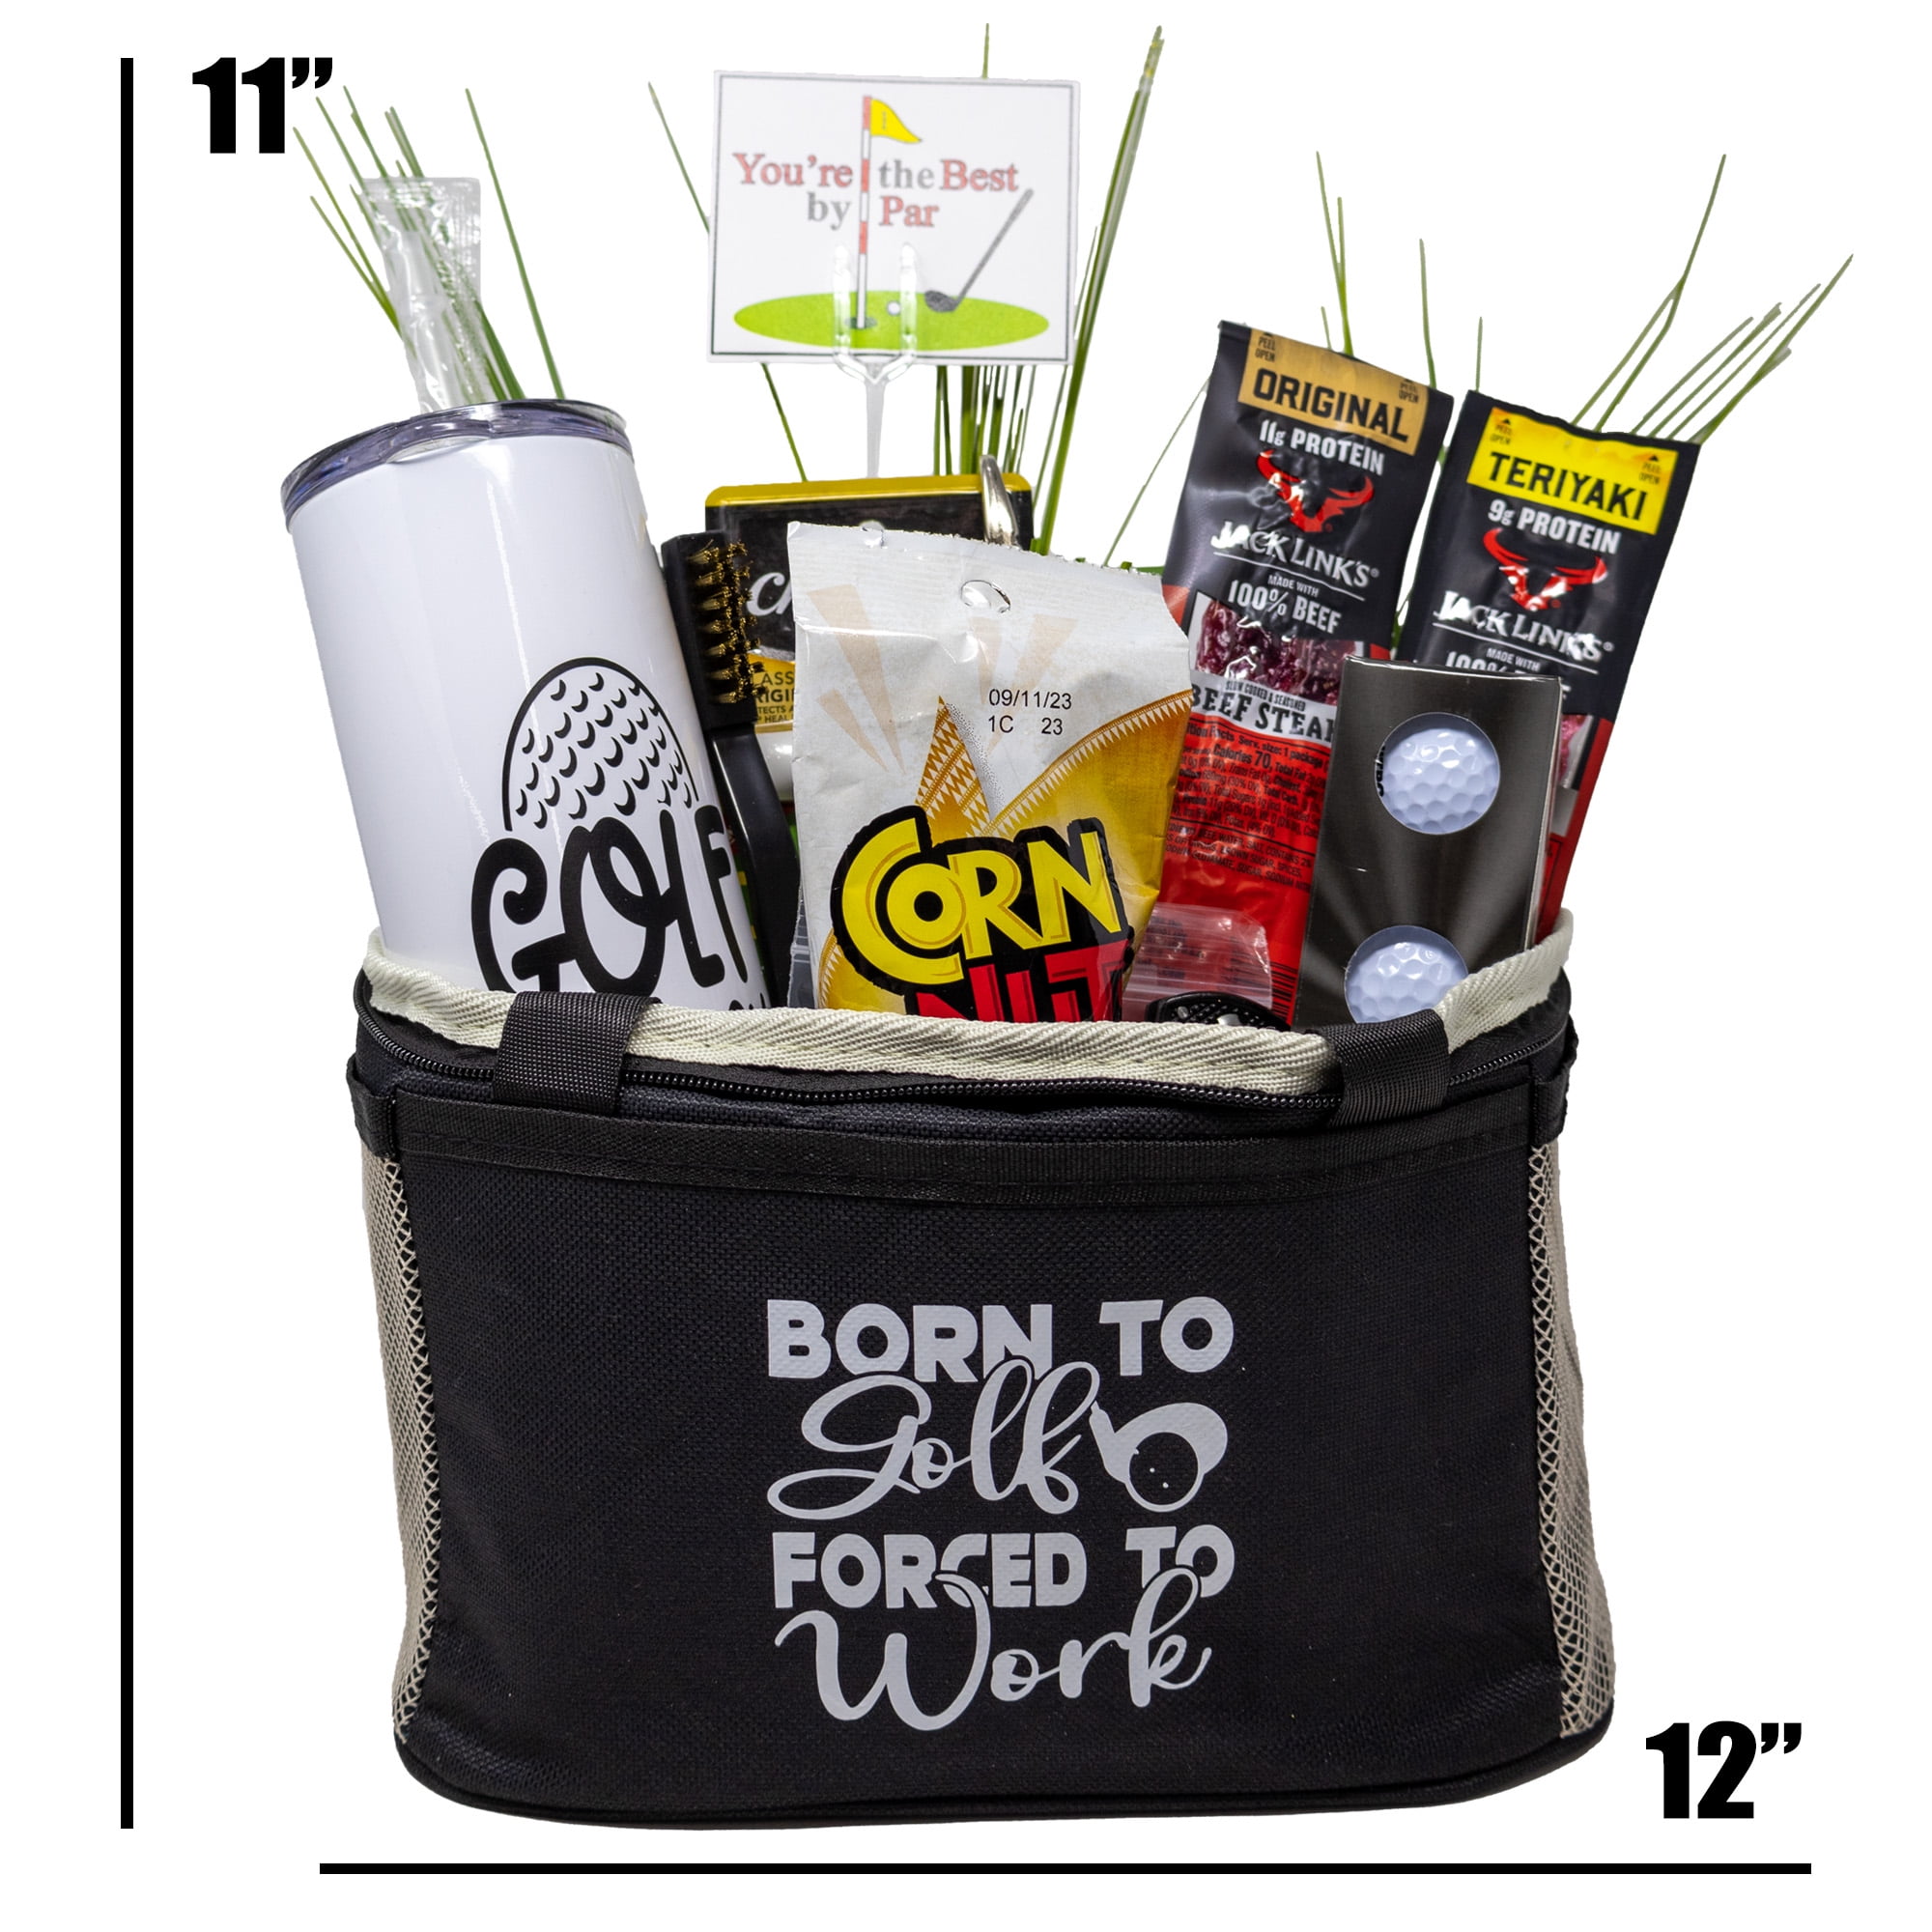 Golfer's Birthday Gift Send Fast Delivery Mississauga. - MY BASKETS